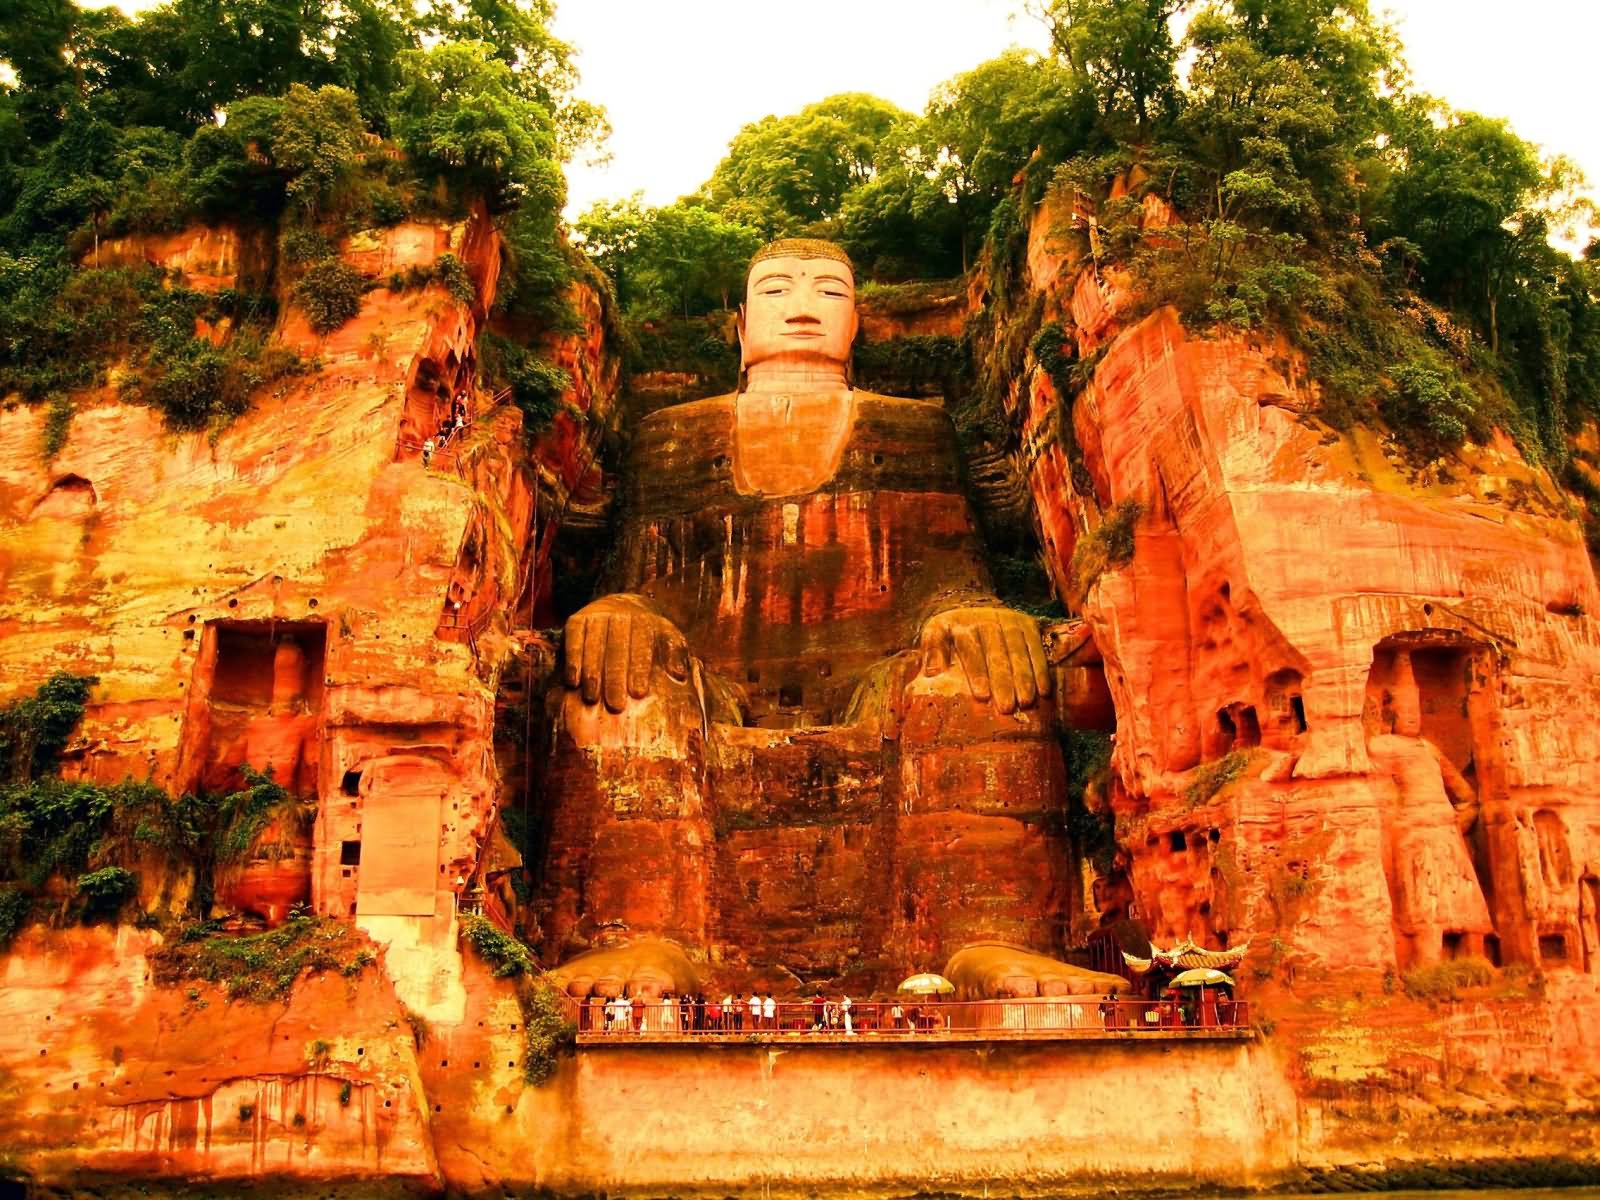 The Leshan Giant Buddha Statue Seen From The Front